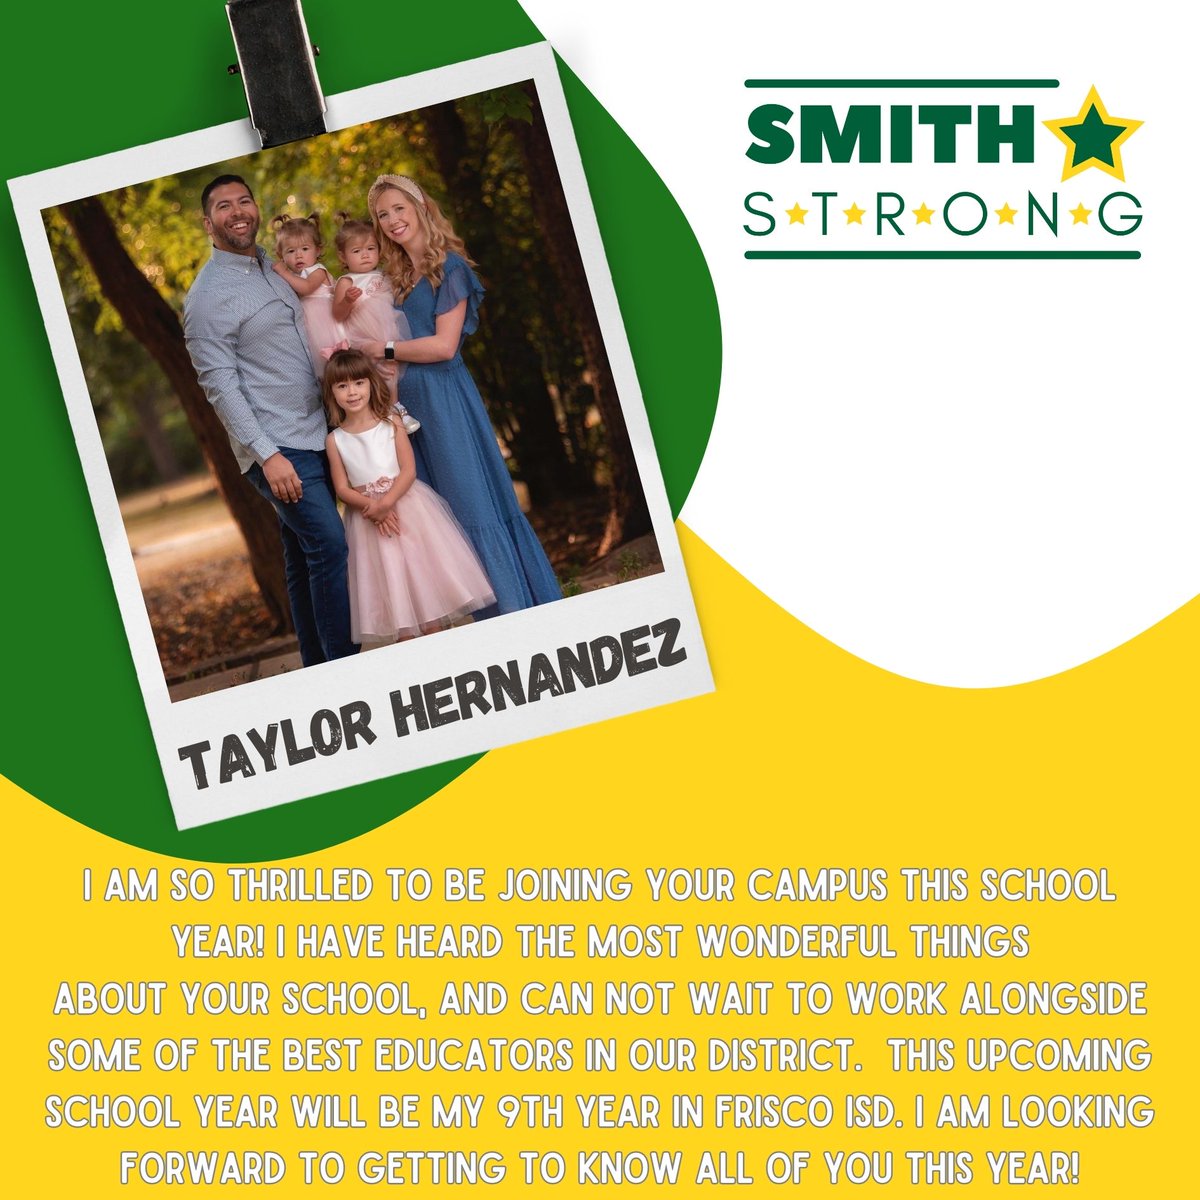 #SMITHSTRONG💪, help us welcome Taylor Hernandez to Smith Elementary! She will be our new Assistant Principal here at Smith Elementary!⭐️💚💪